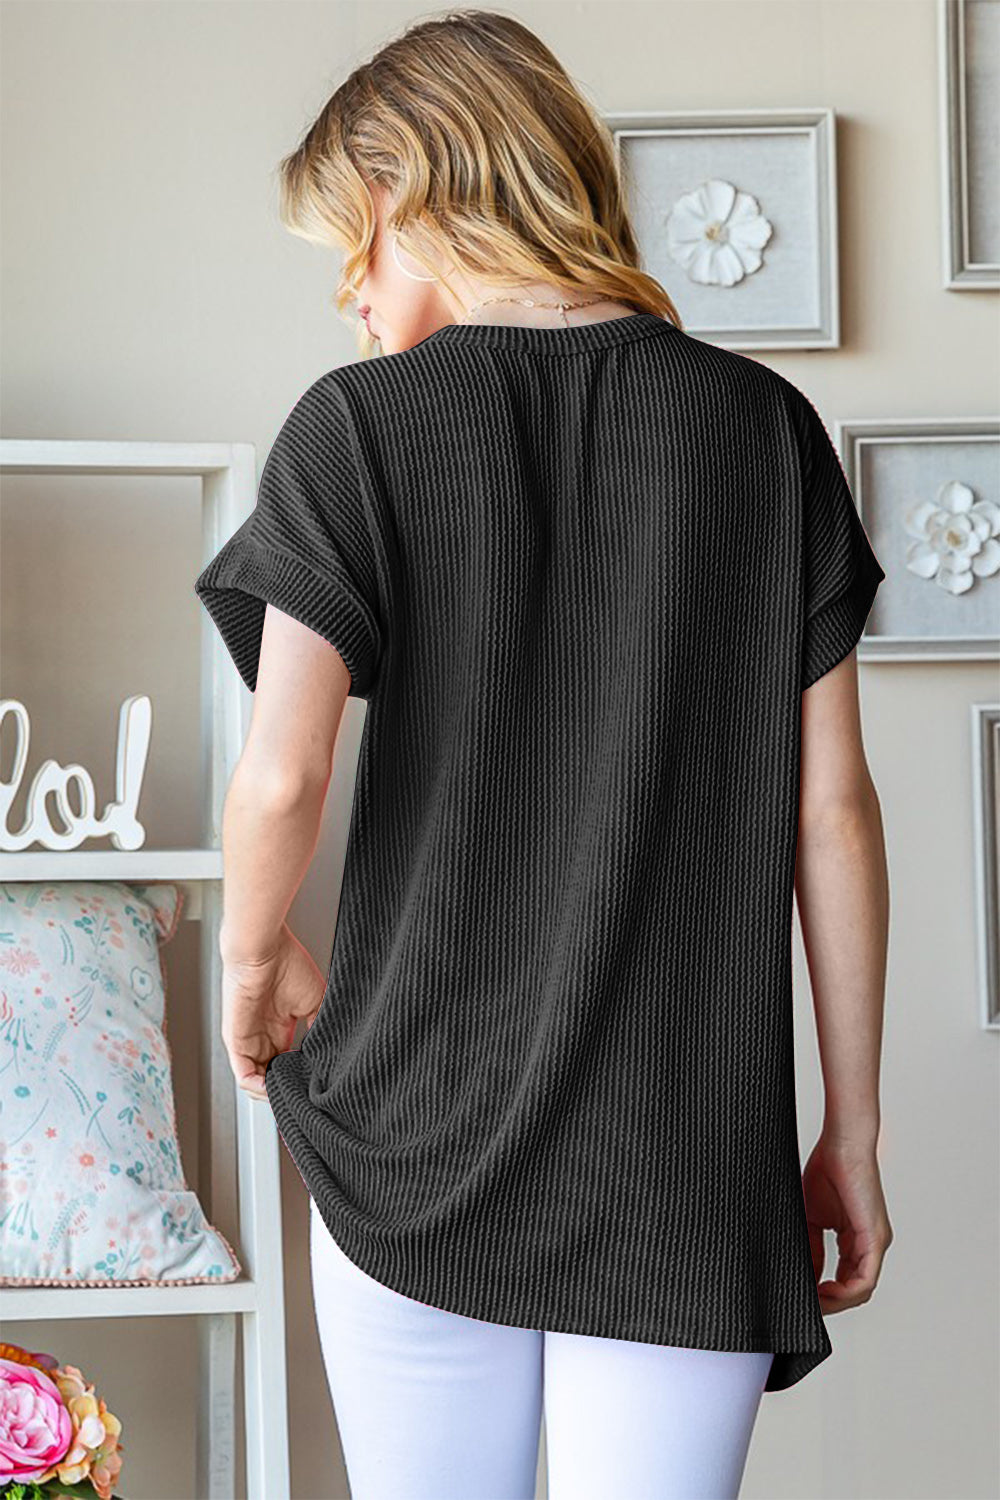 USA Graphic Short Sleeve Rib Knit Top in Black